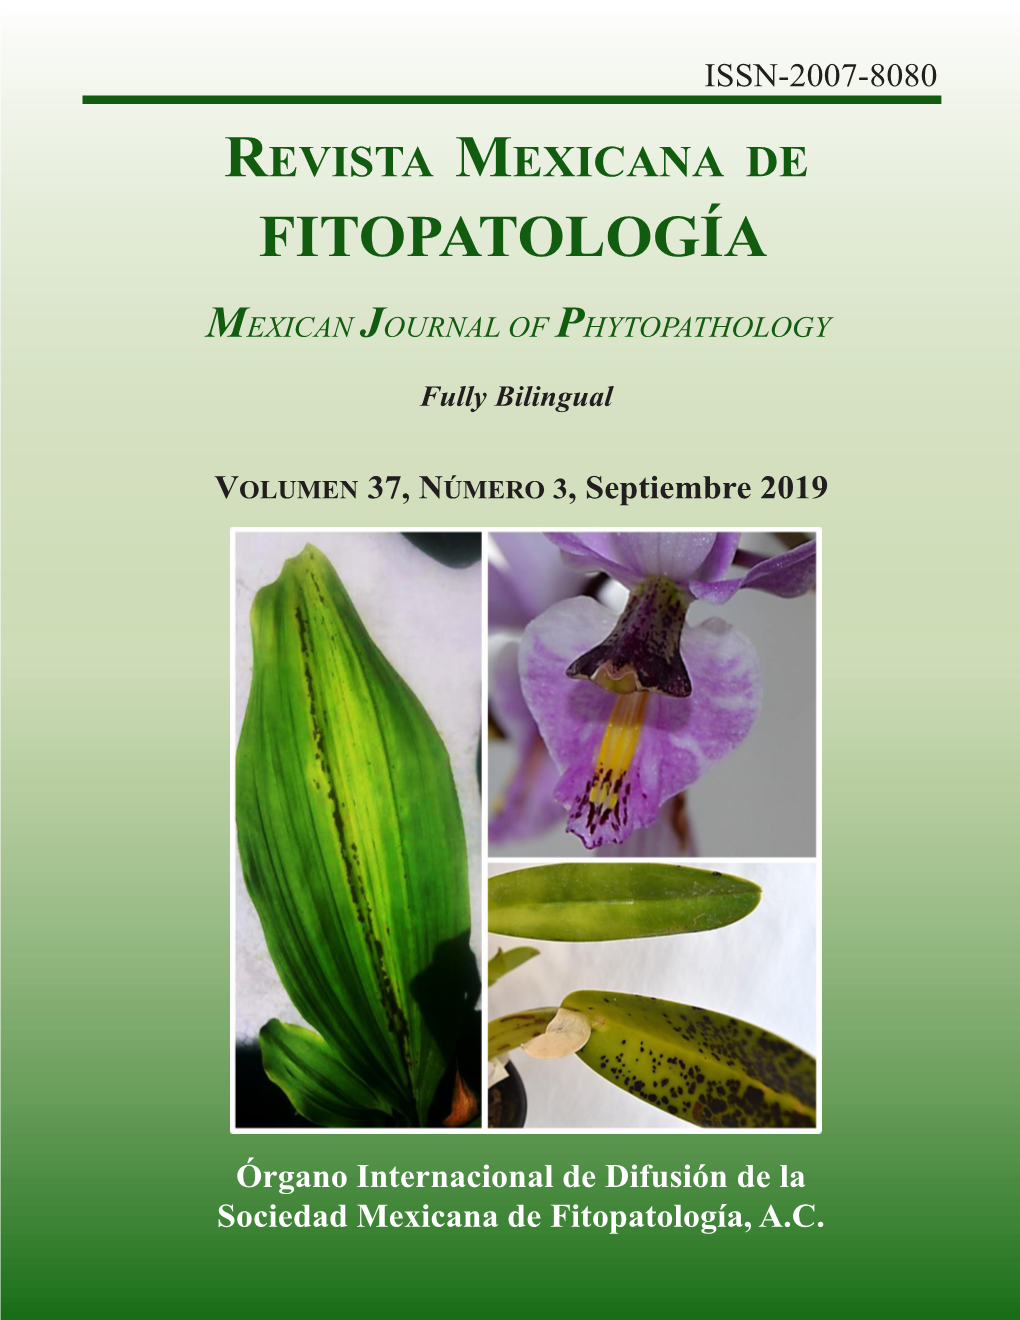 Mexican Journal of Phytopathology